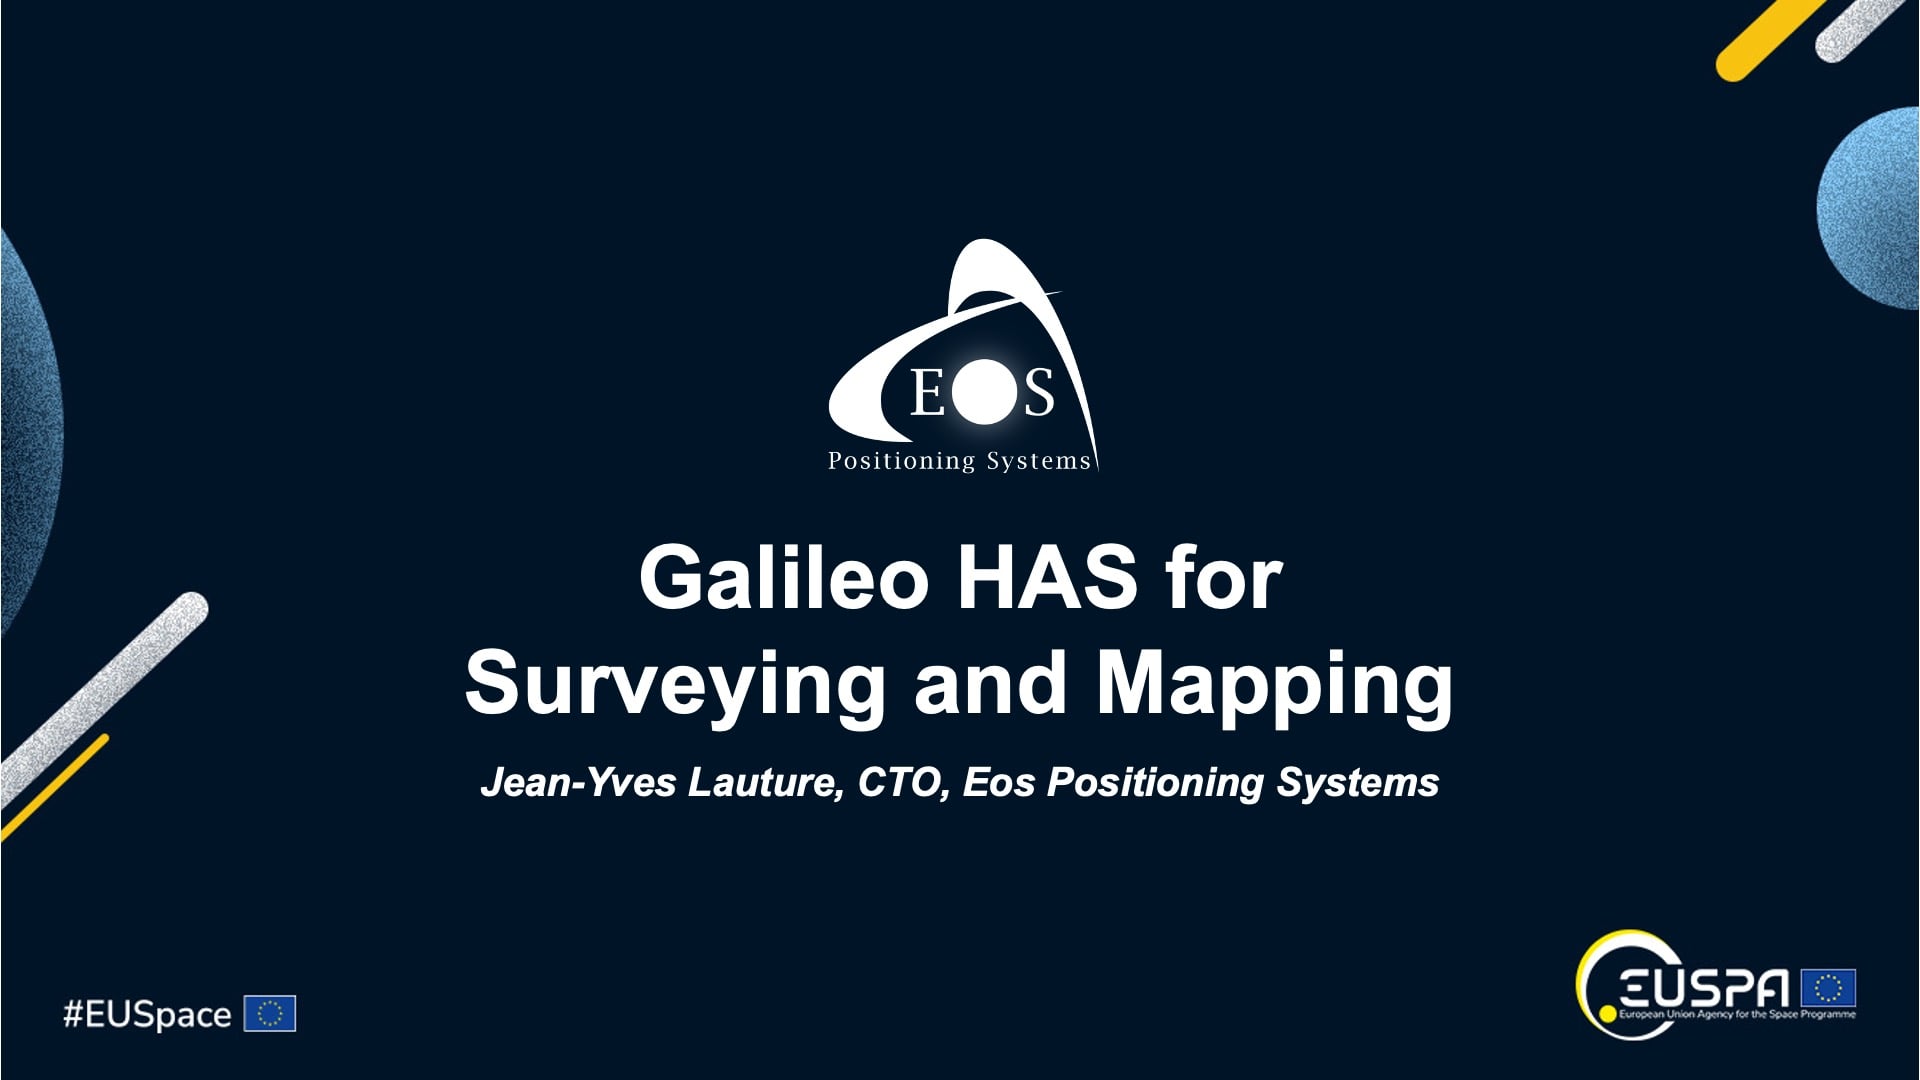 Galileo High Accuracy Service Days Eos Positioning Systems Presentation on using Eos Arrow Gold+ GNSS Receiver with Galileo HAS for Surveying and Mapping